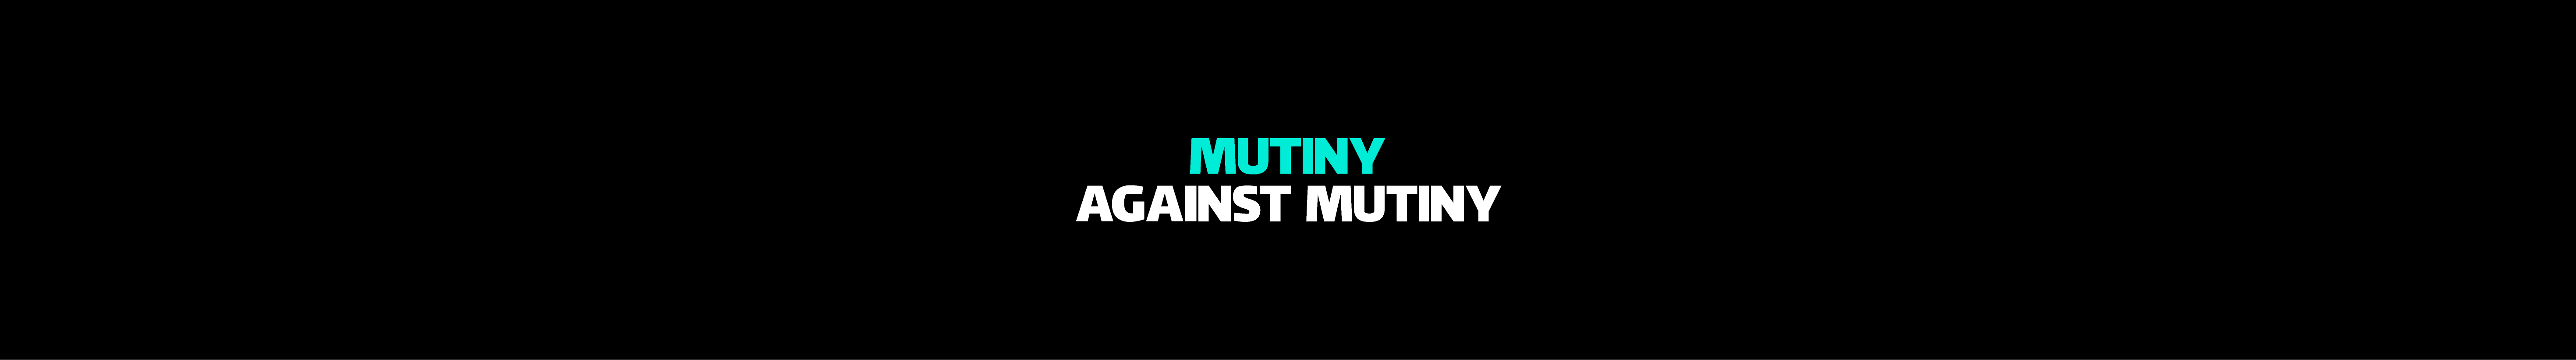 Mutiny Services's profile banner